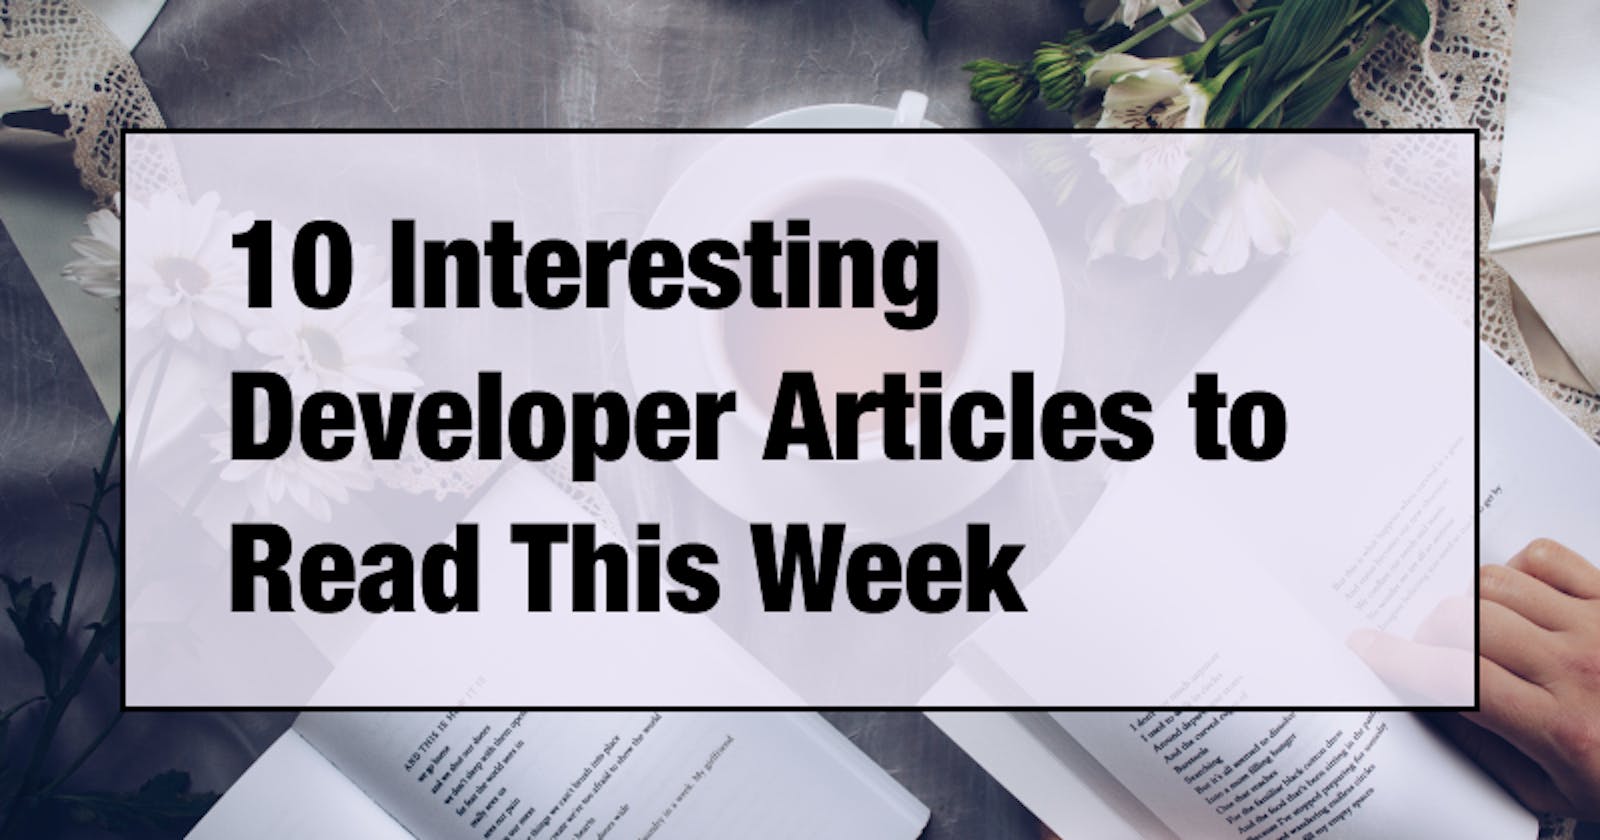 10 Interesting Developer Articles to Read This Week